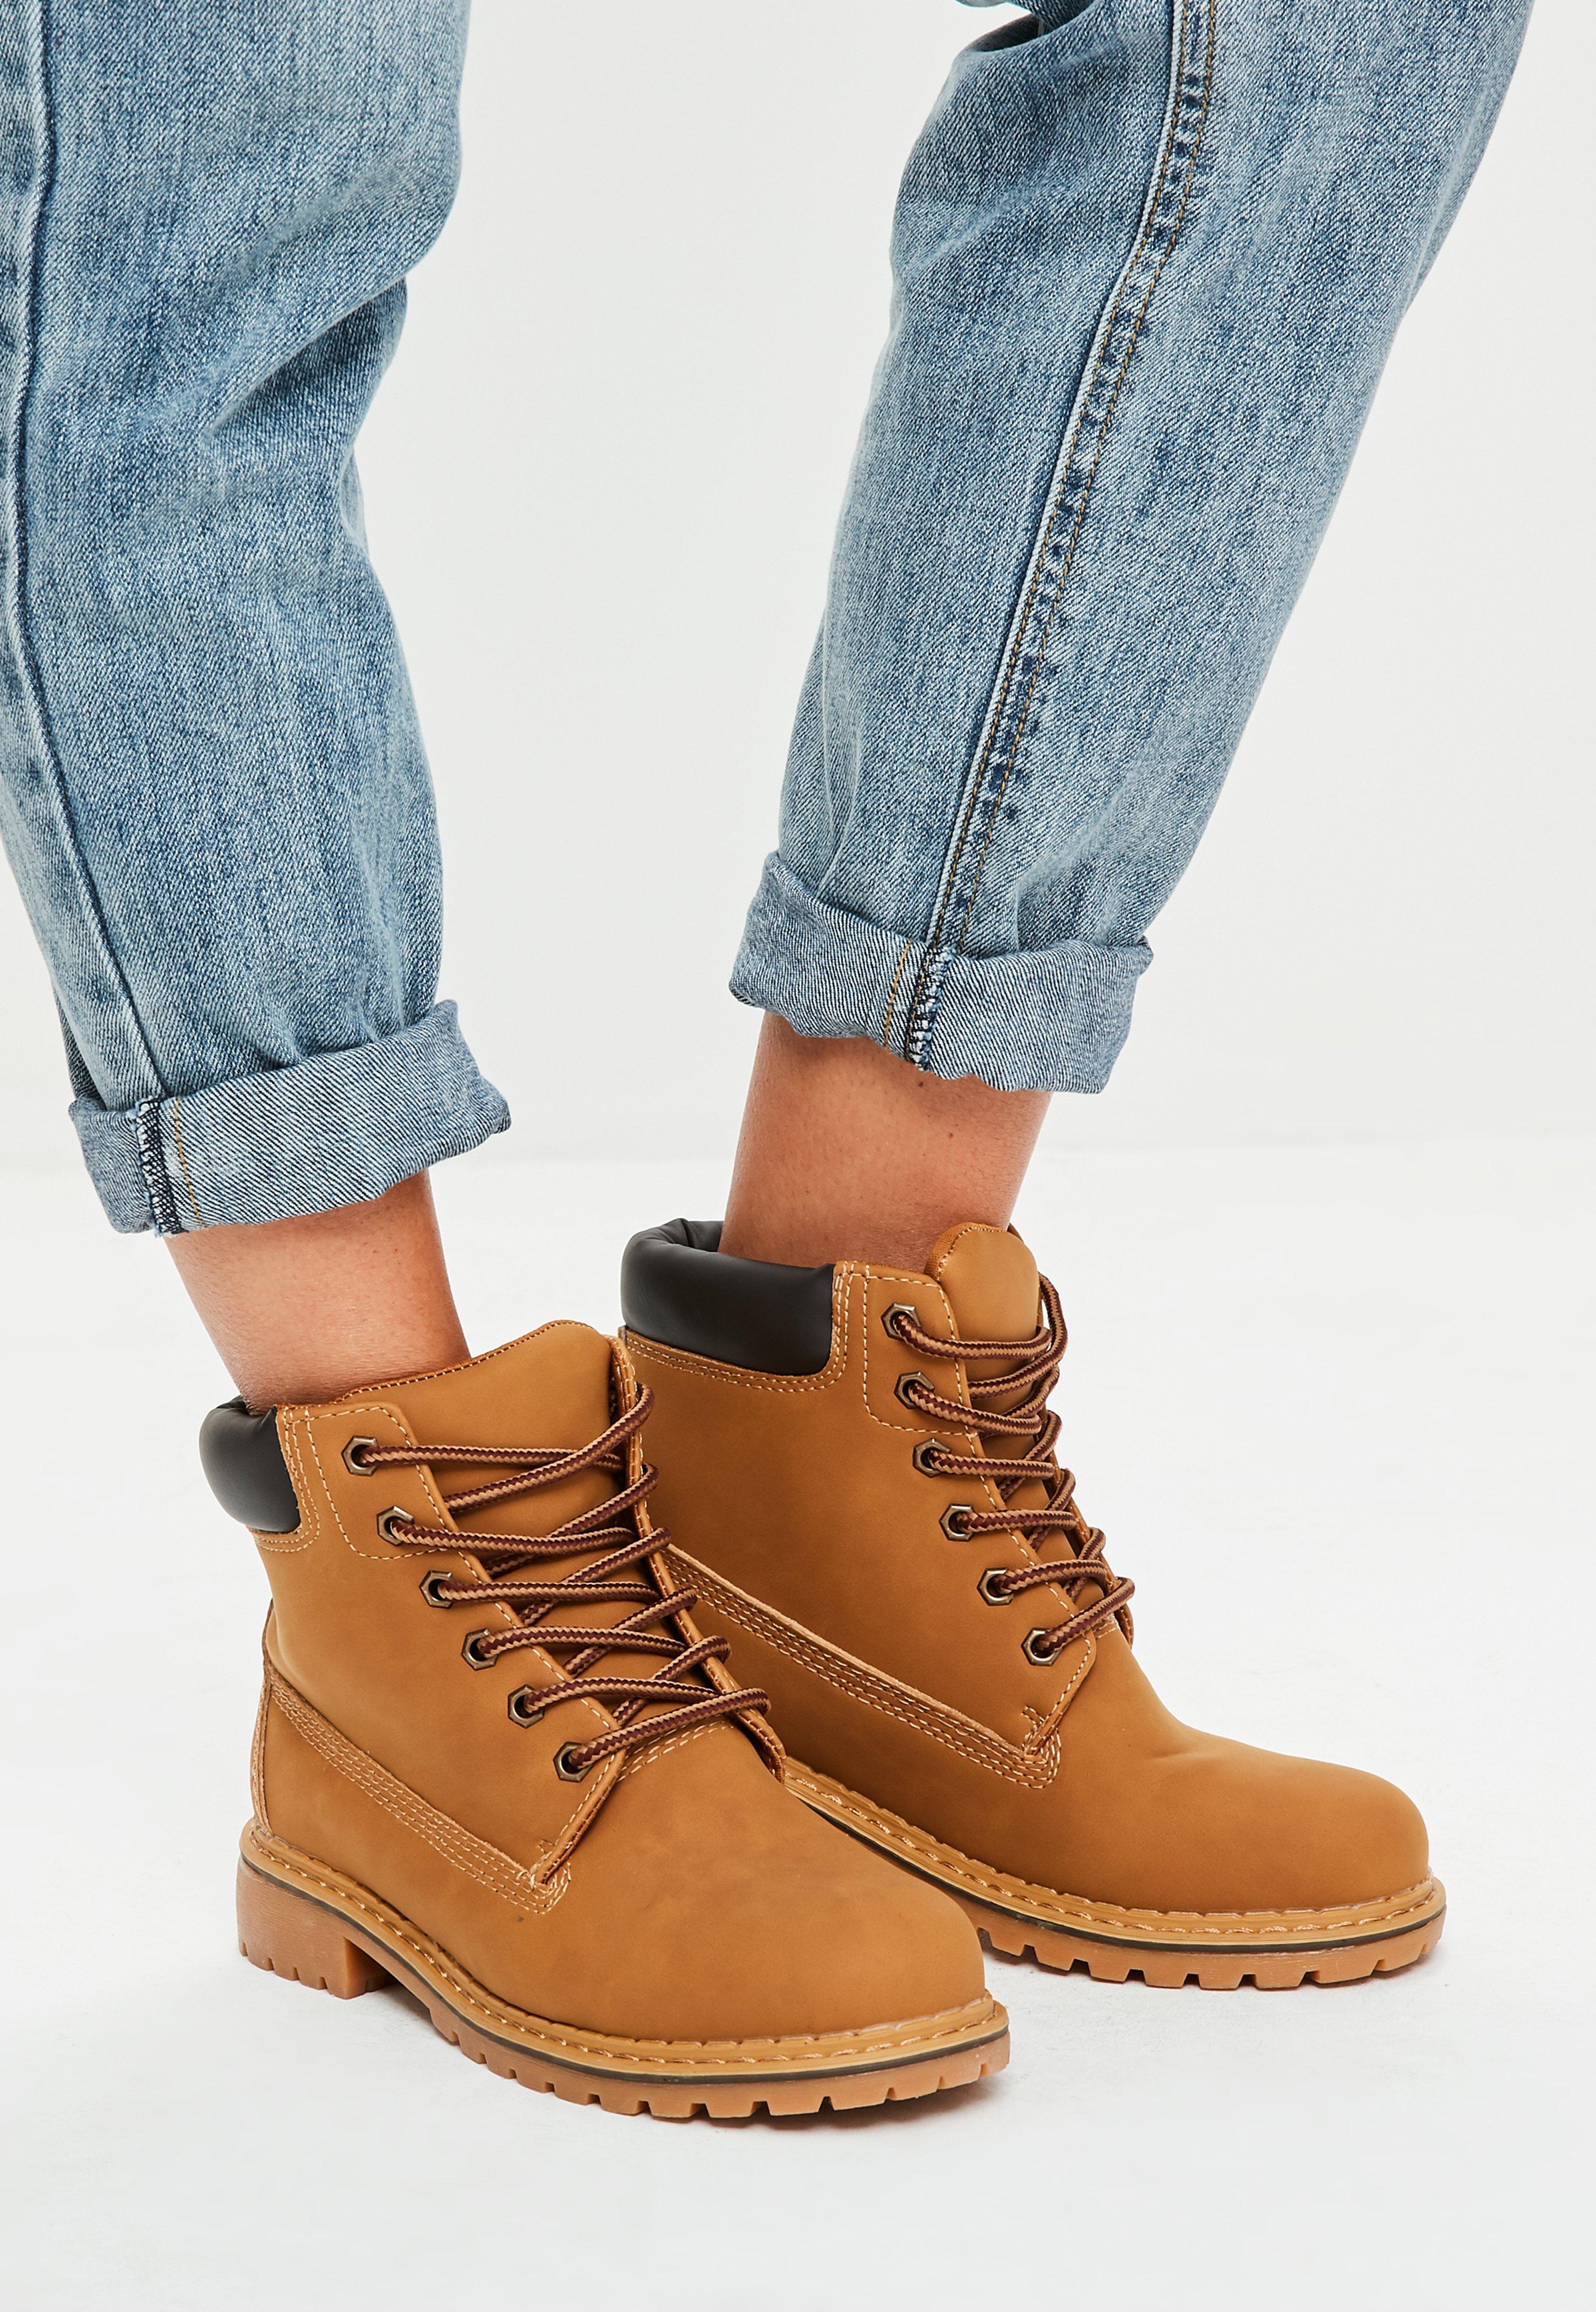 Lyst - Missguided Brown Trucker Boots in Brown